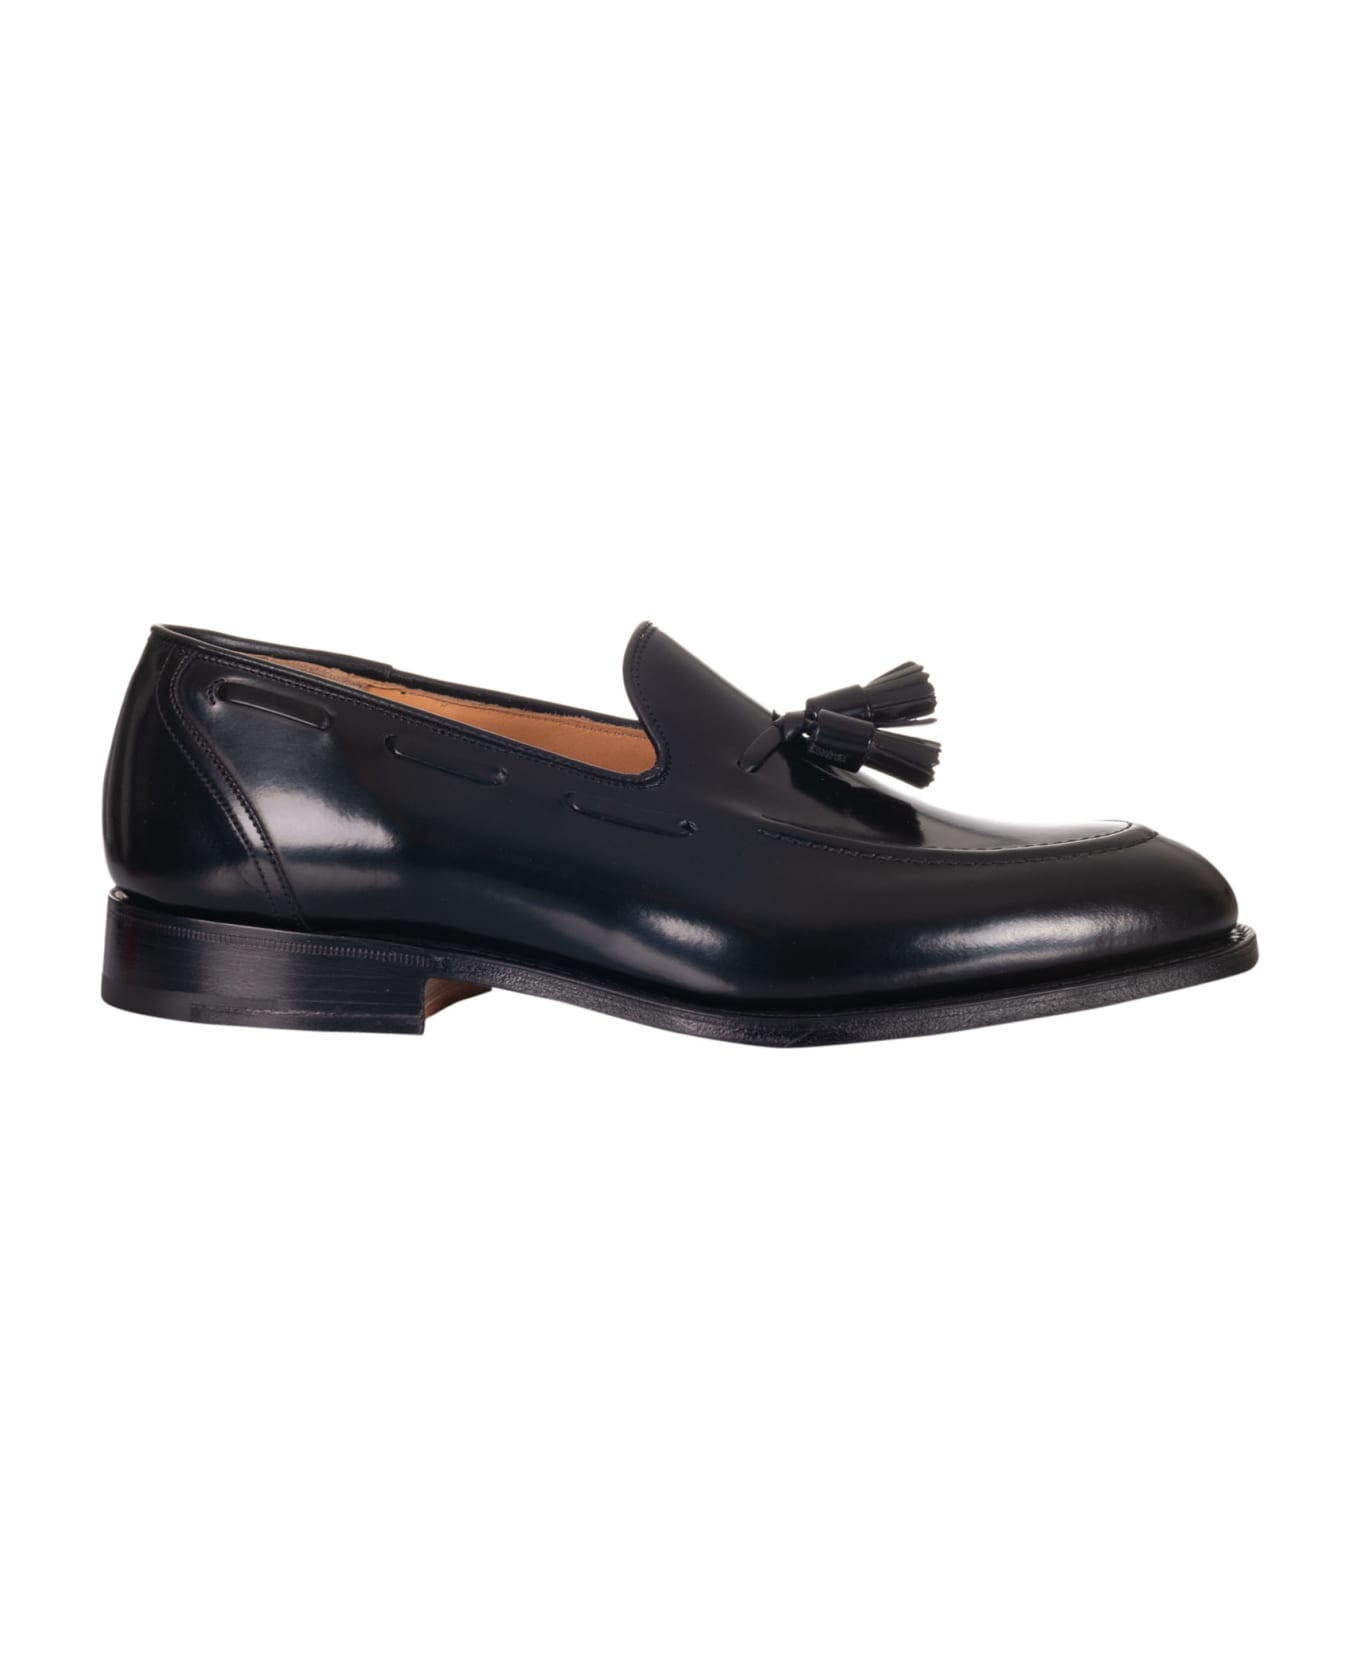 Church's Kingsley Loafers - Black